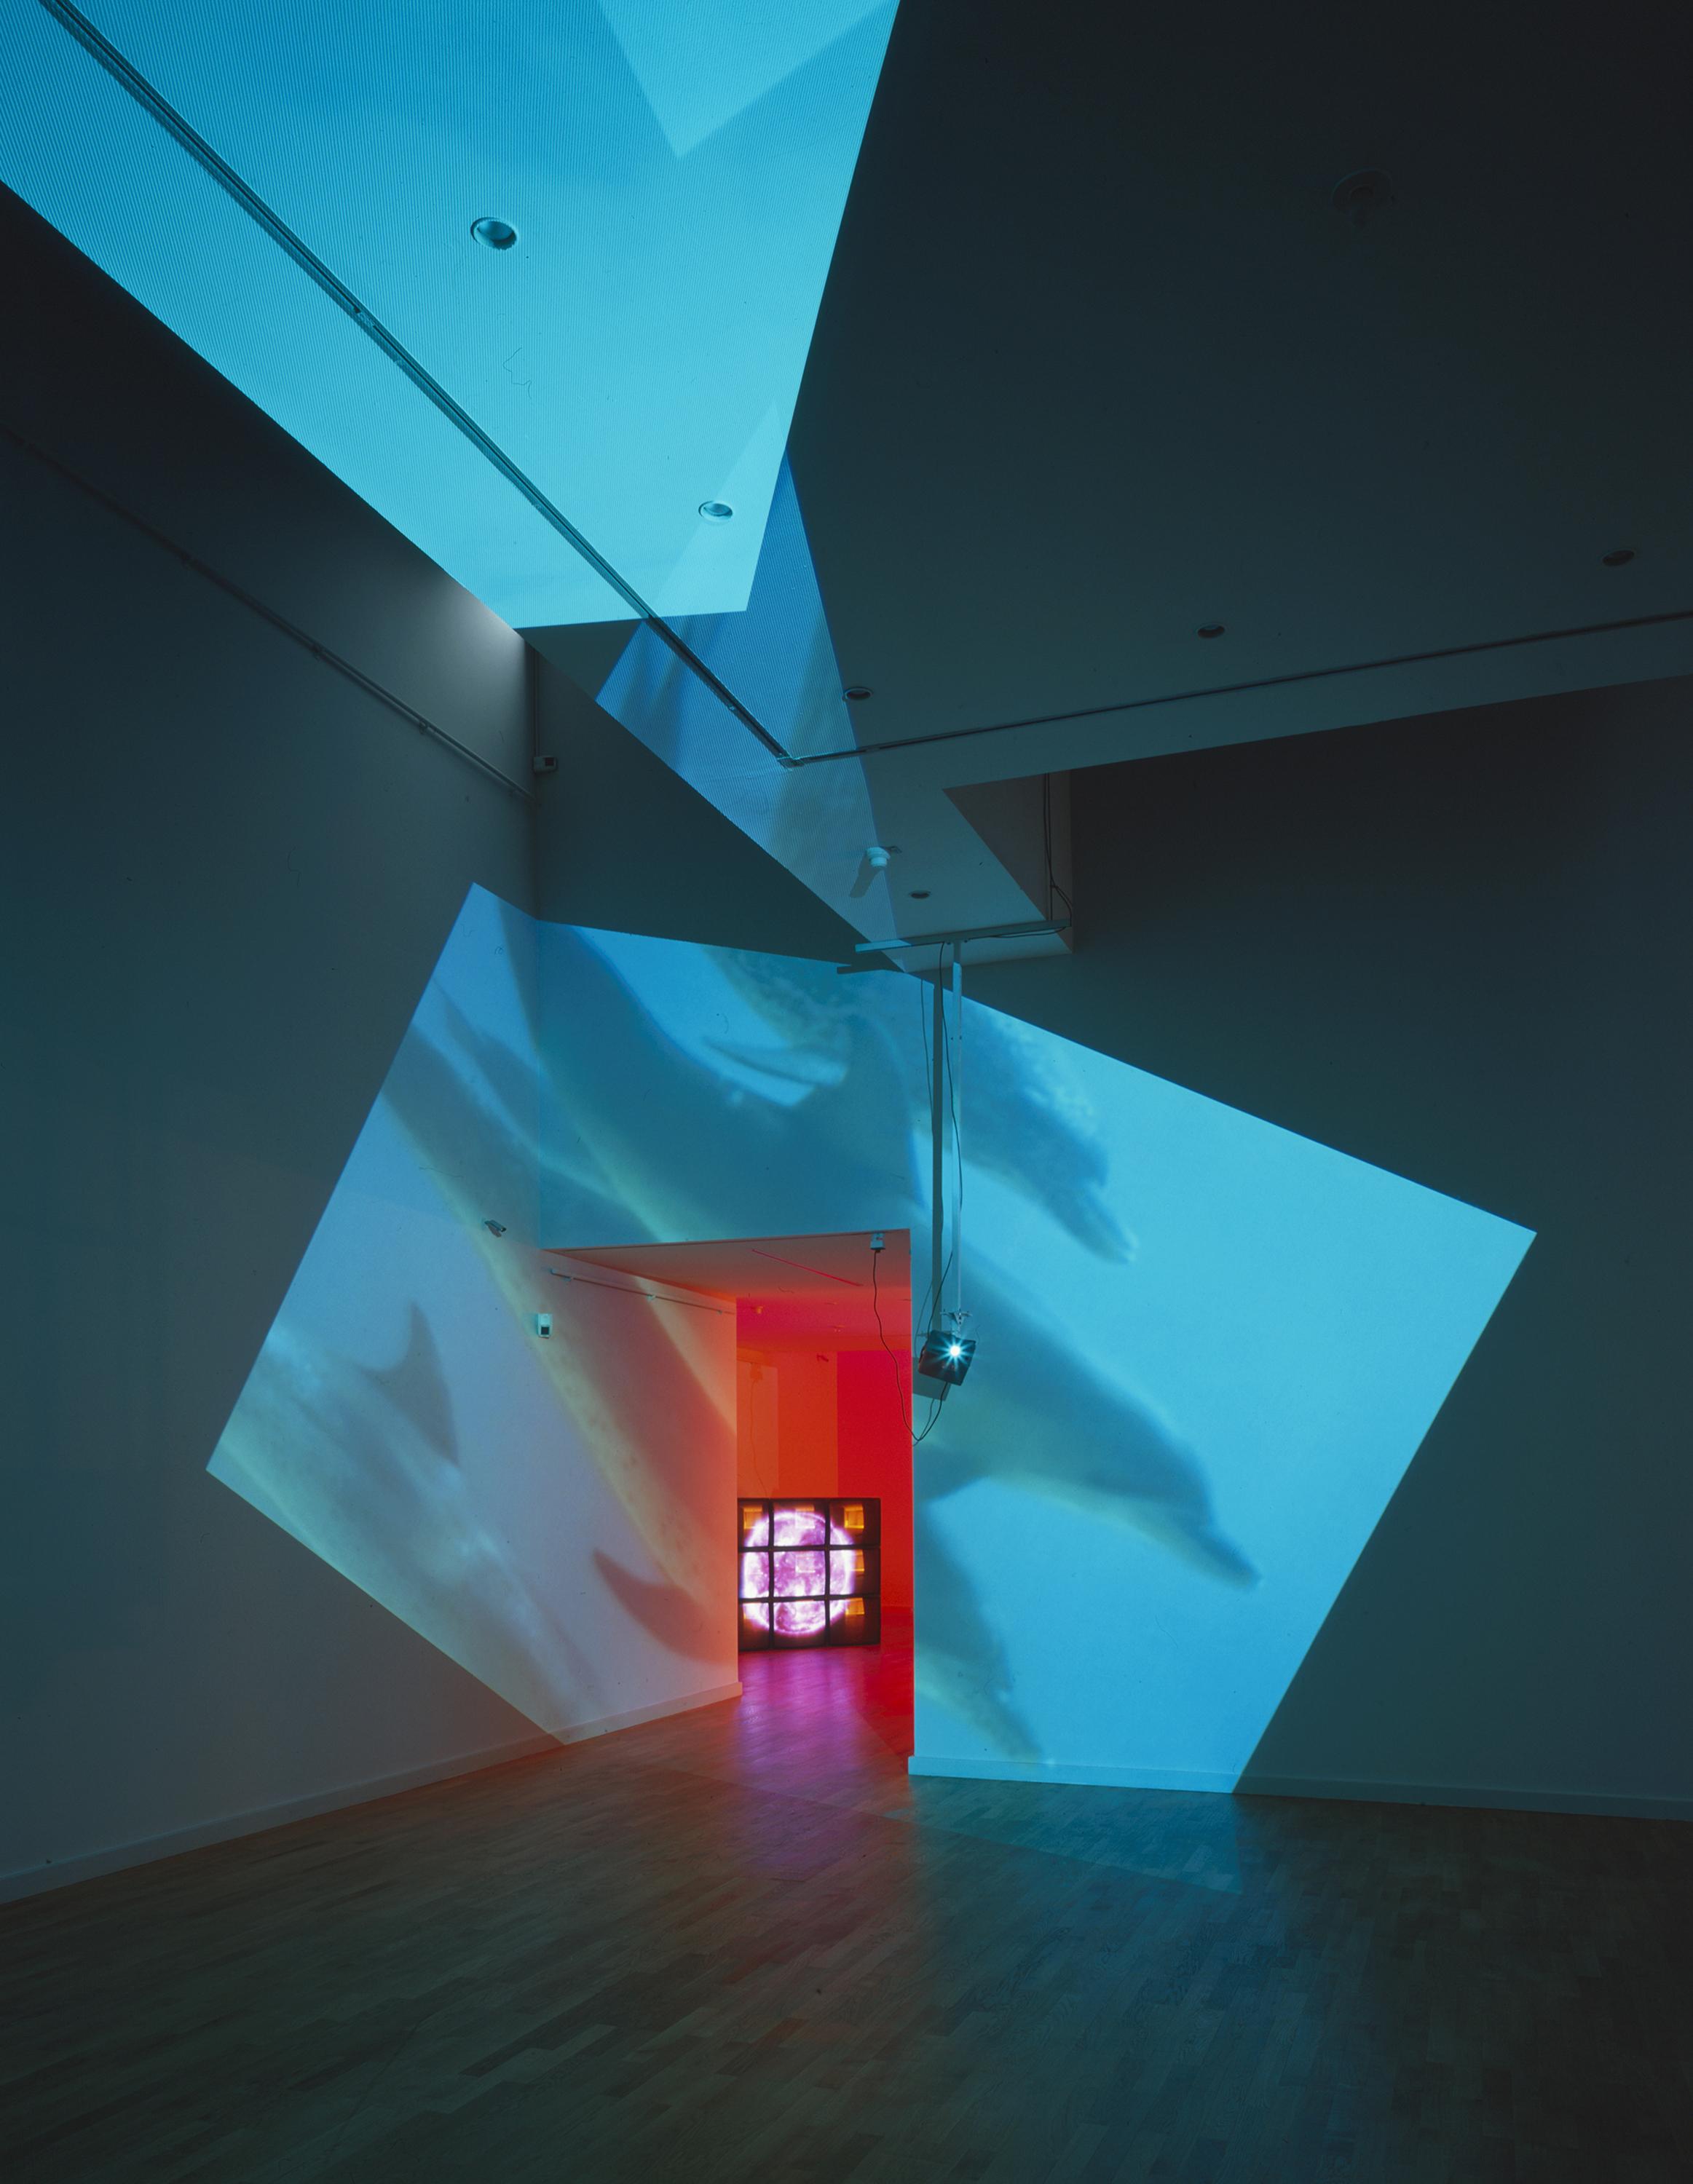 Video of a pod of dolphins in cool blue tones is projected across the walls and doorway of a gallery; a luminous red and pink sculptural installation is visible through the doorway.